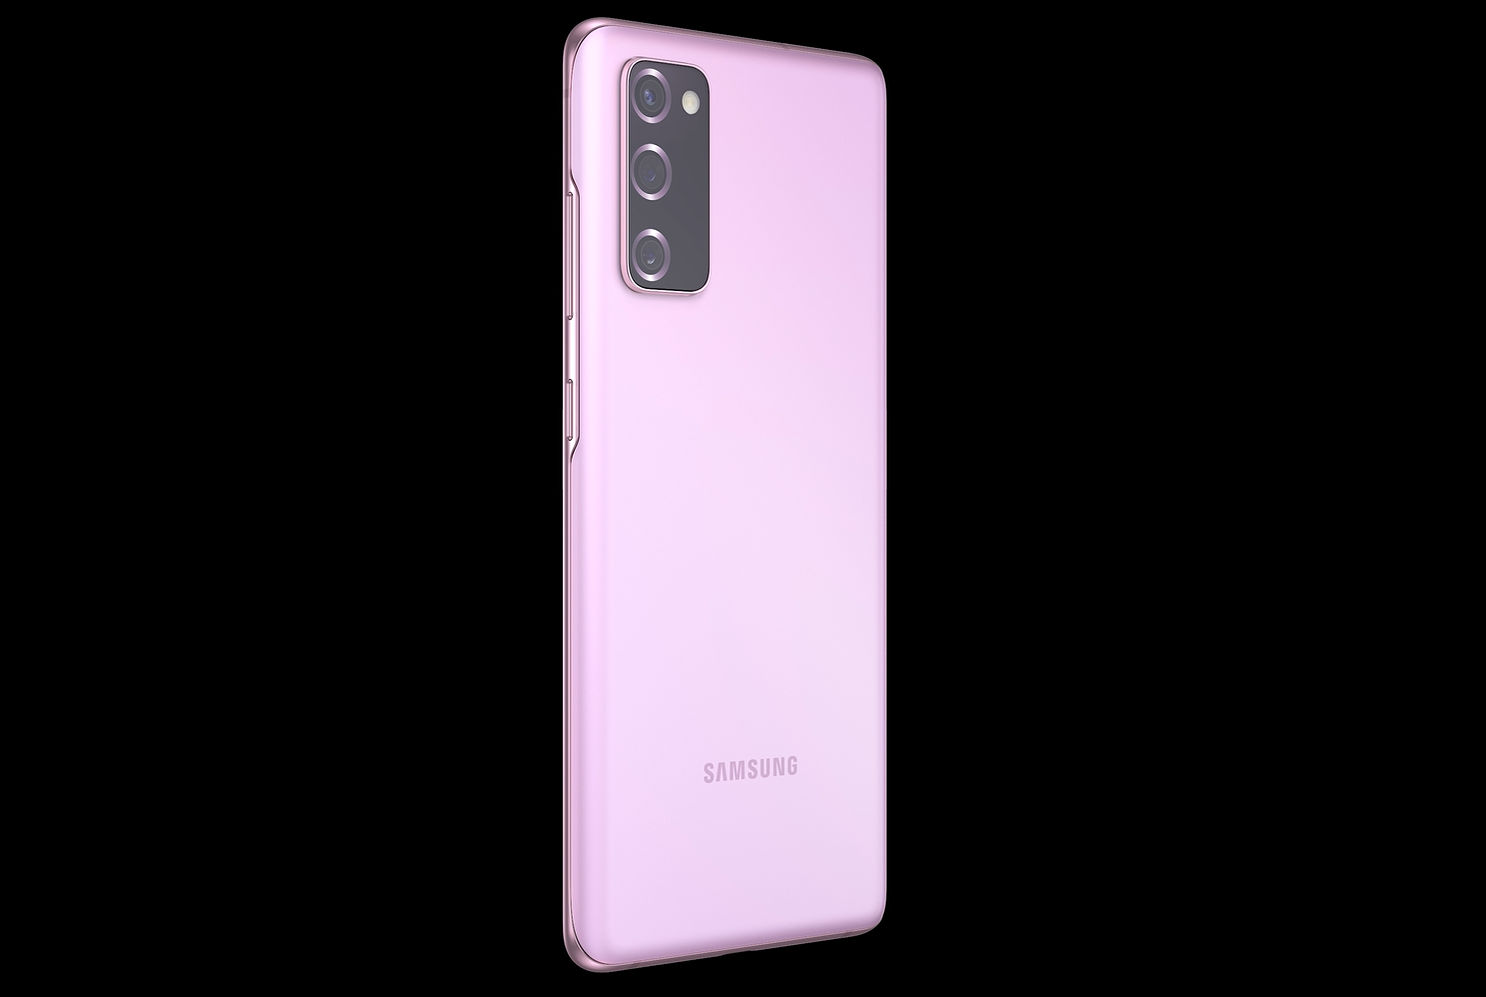 Samsung Galaxy S20 FE 5G Images, Official Pictures, Photo Gallery